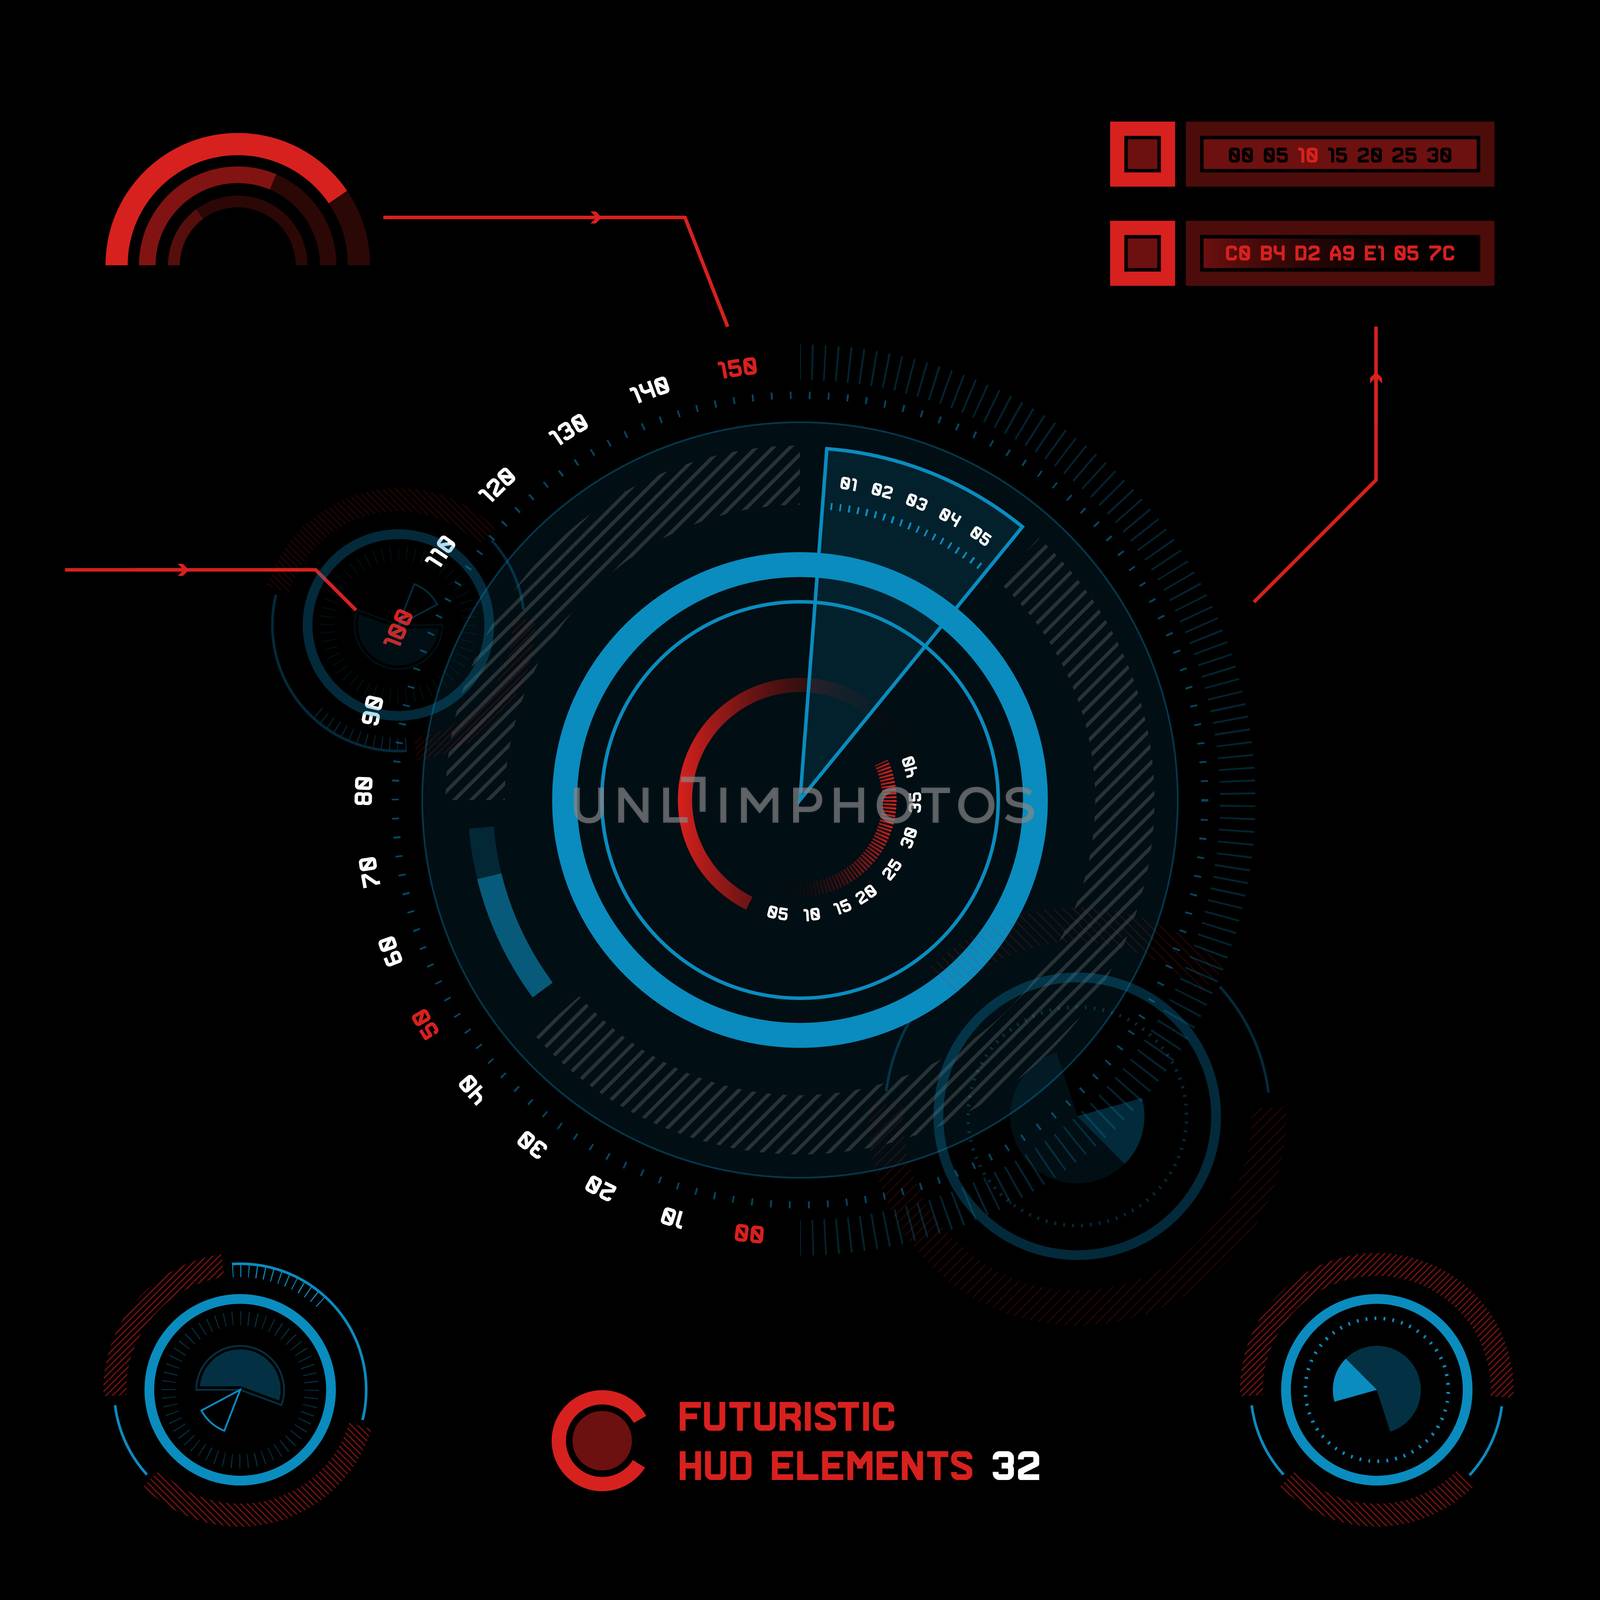 Futuristic touch screen user interface HUD by clusterx